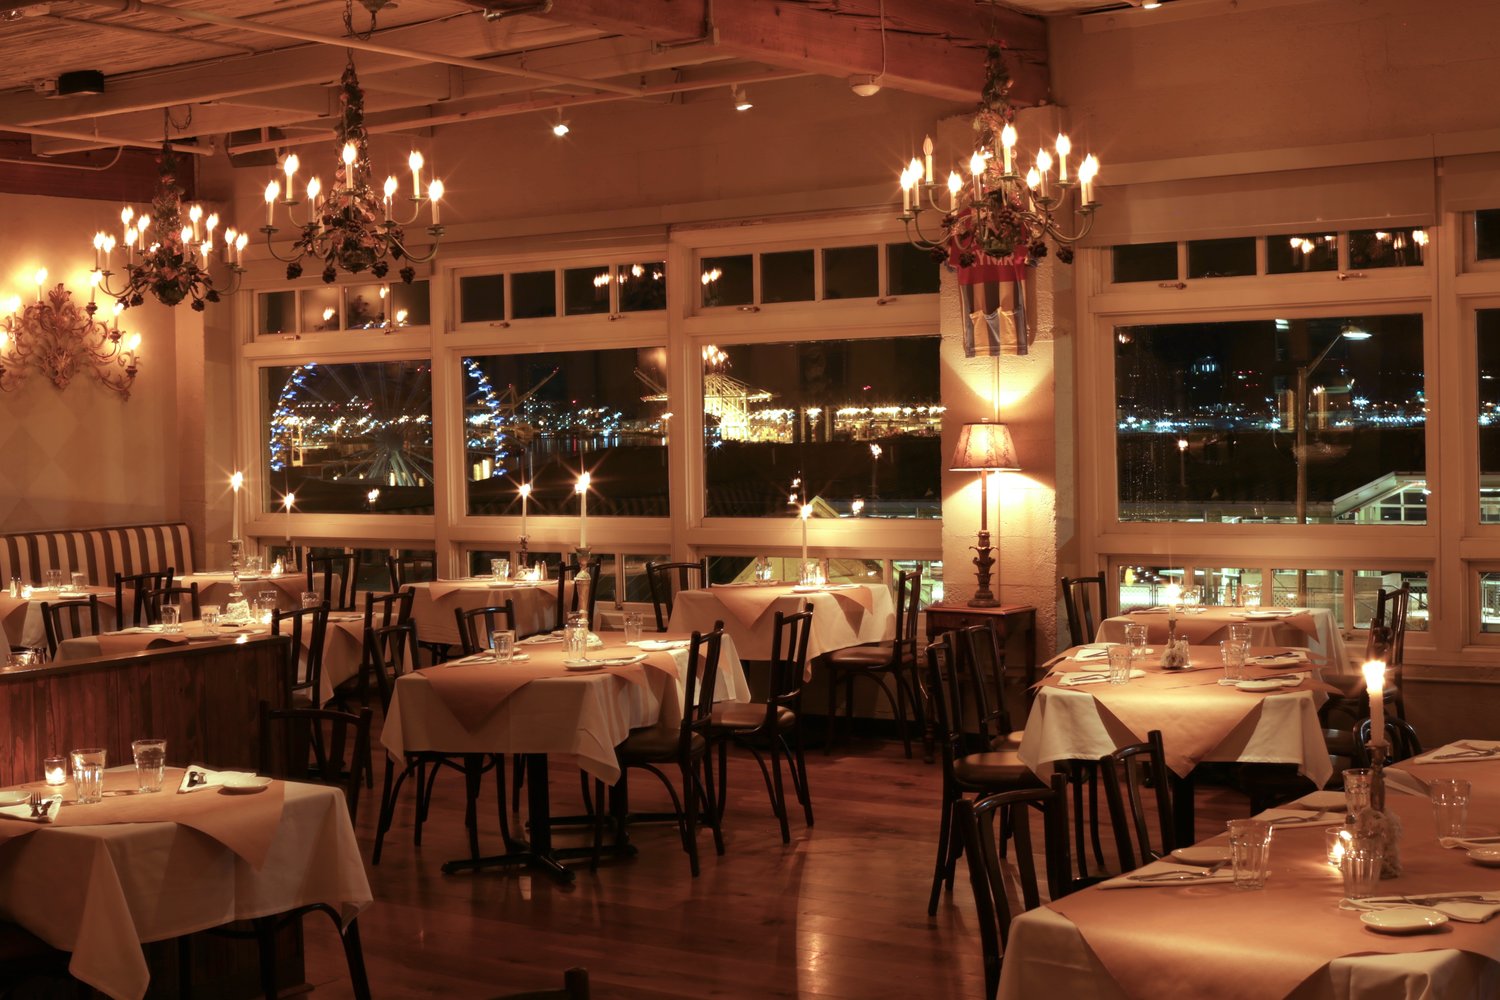 The Dining Area of the Pink Door Restaurant with Waterfront Views